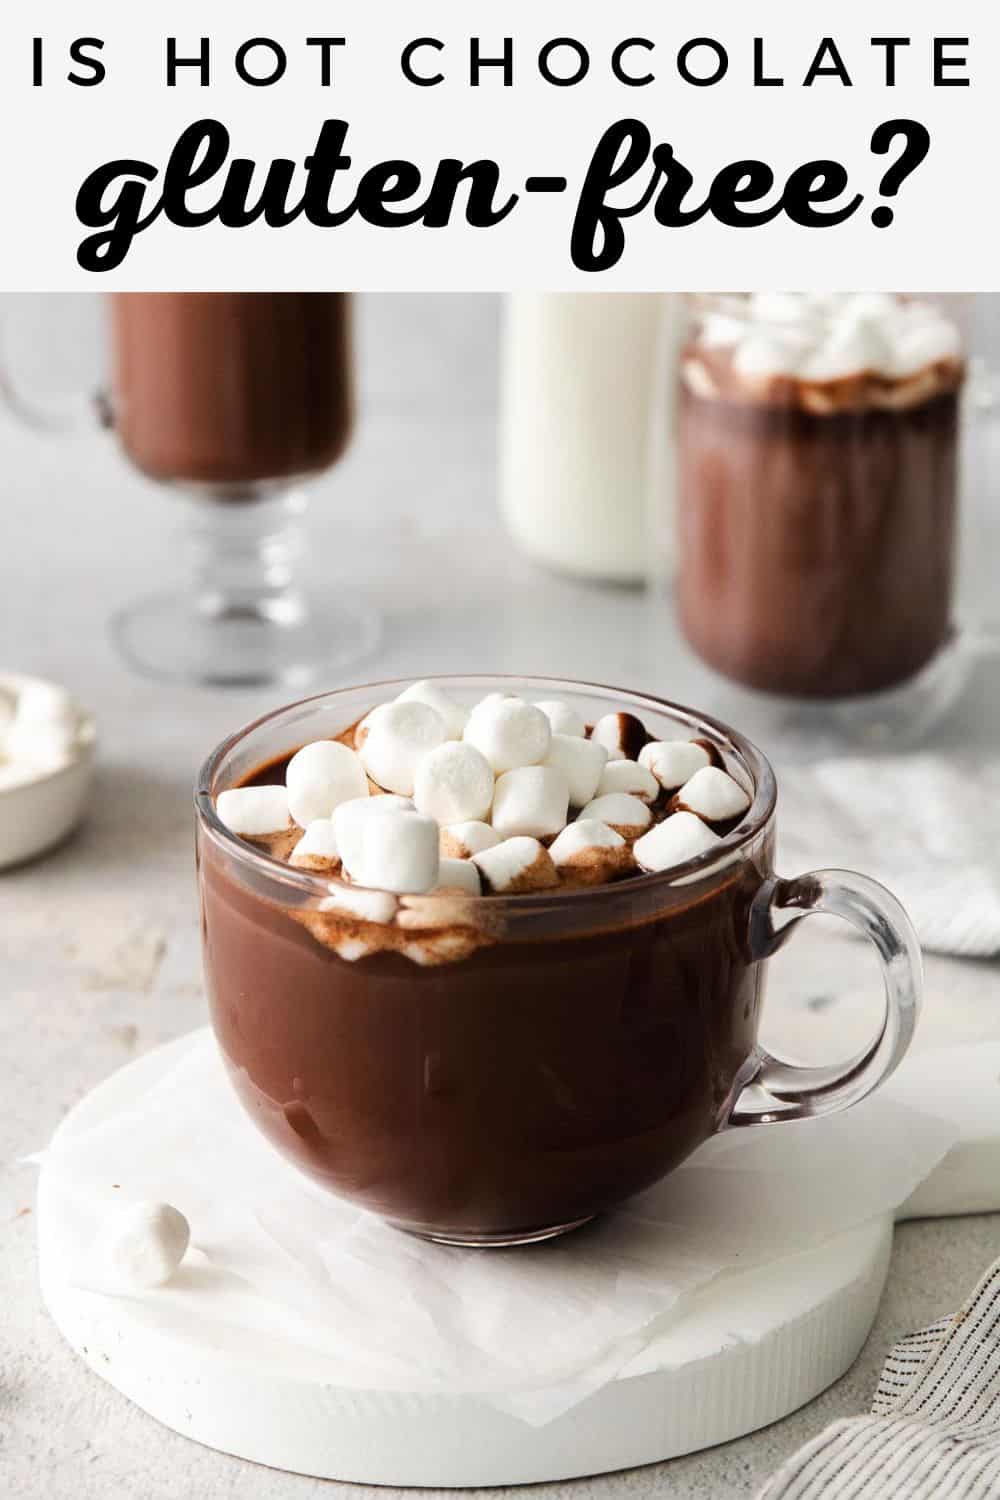 A glass mug of hot chocolate with marshmallows on top, and more mugs of hot chocolate in the background